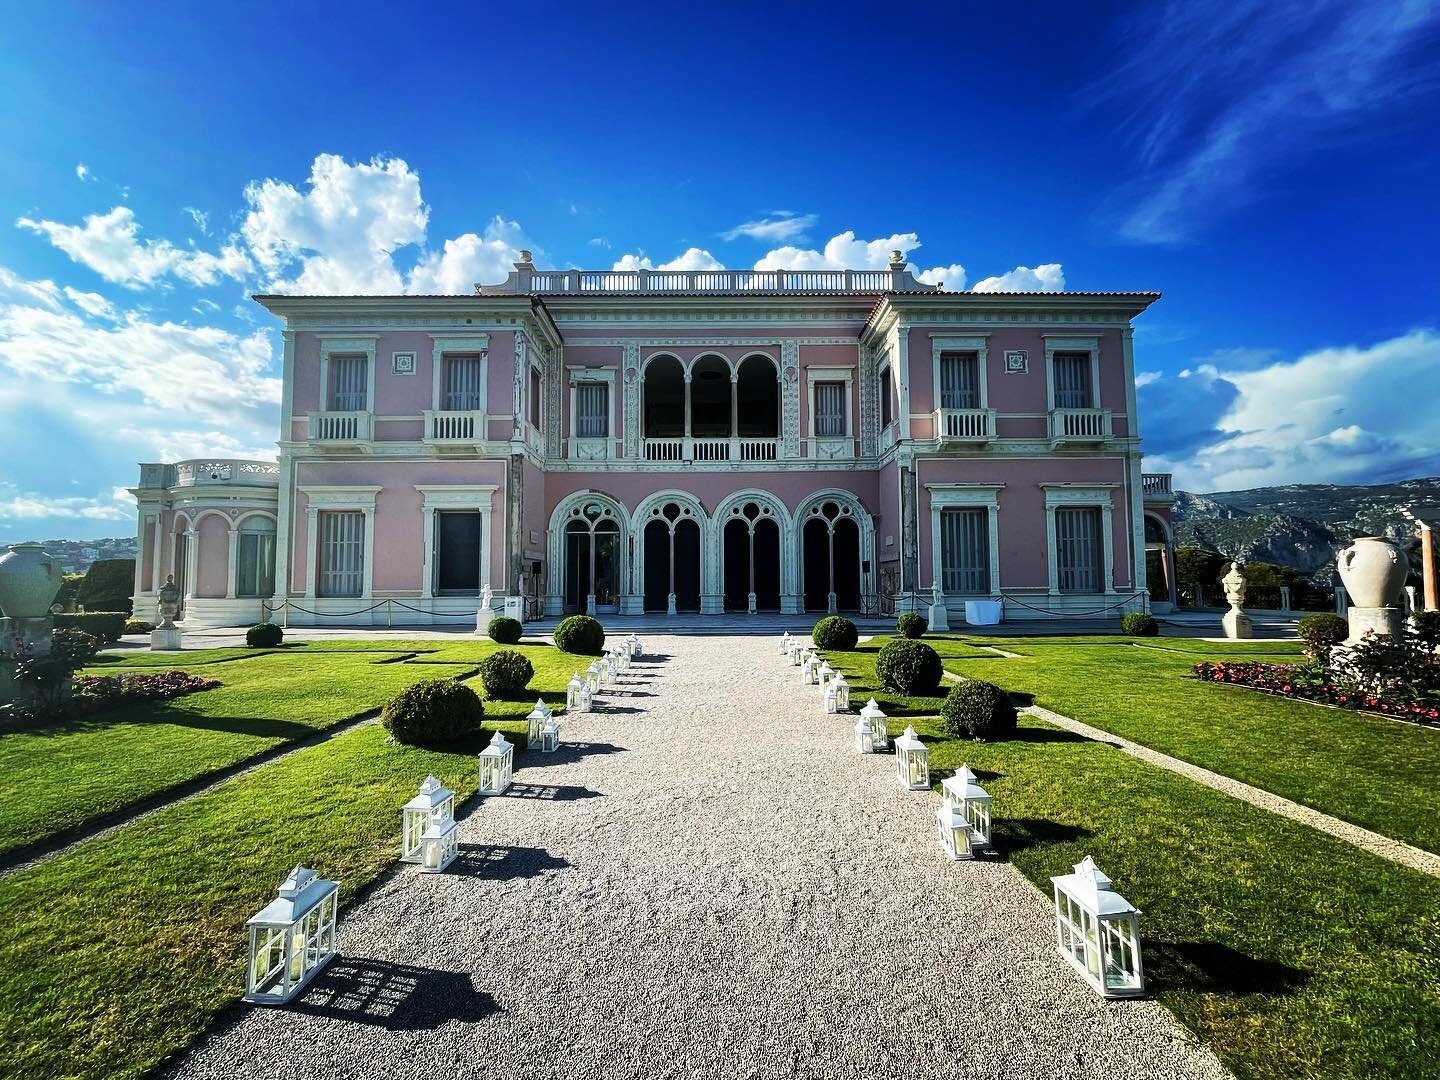 Today we are at the stunning @villaephrussi for John&rsquo;s 70th Birthday! Great to be working with @rivieraorganisation for the first time.  Villa Ephrussi de Rothschild is one of the most beautiful Renaissance-style palaces on the C&ocirc;te d'Azu